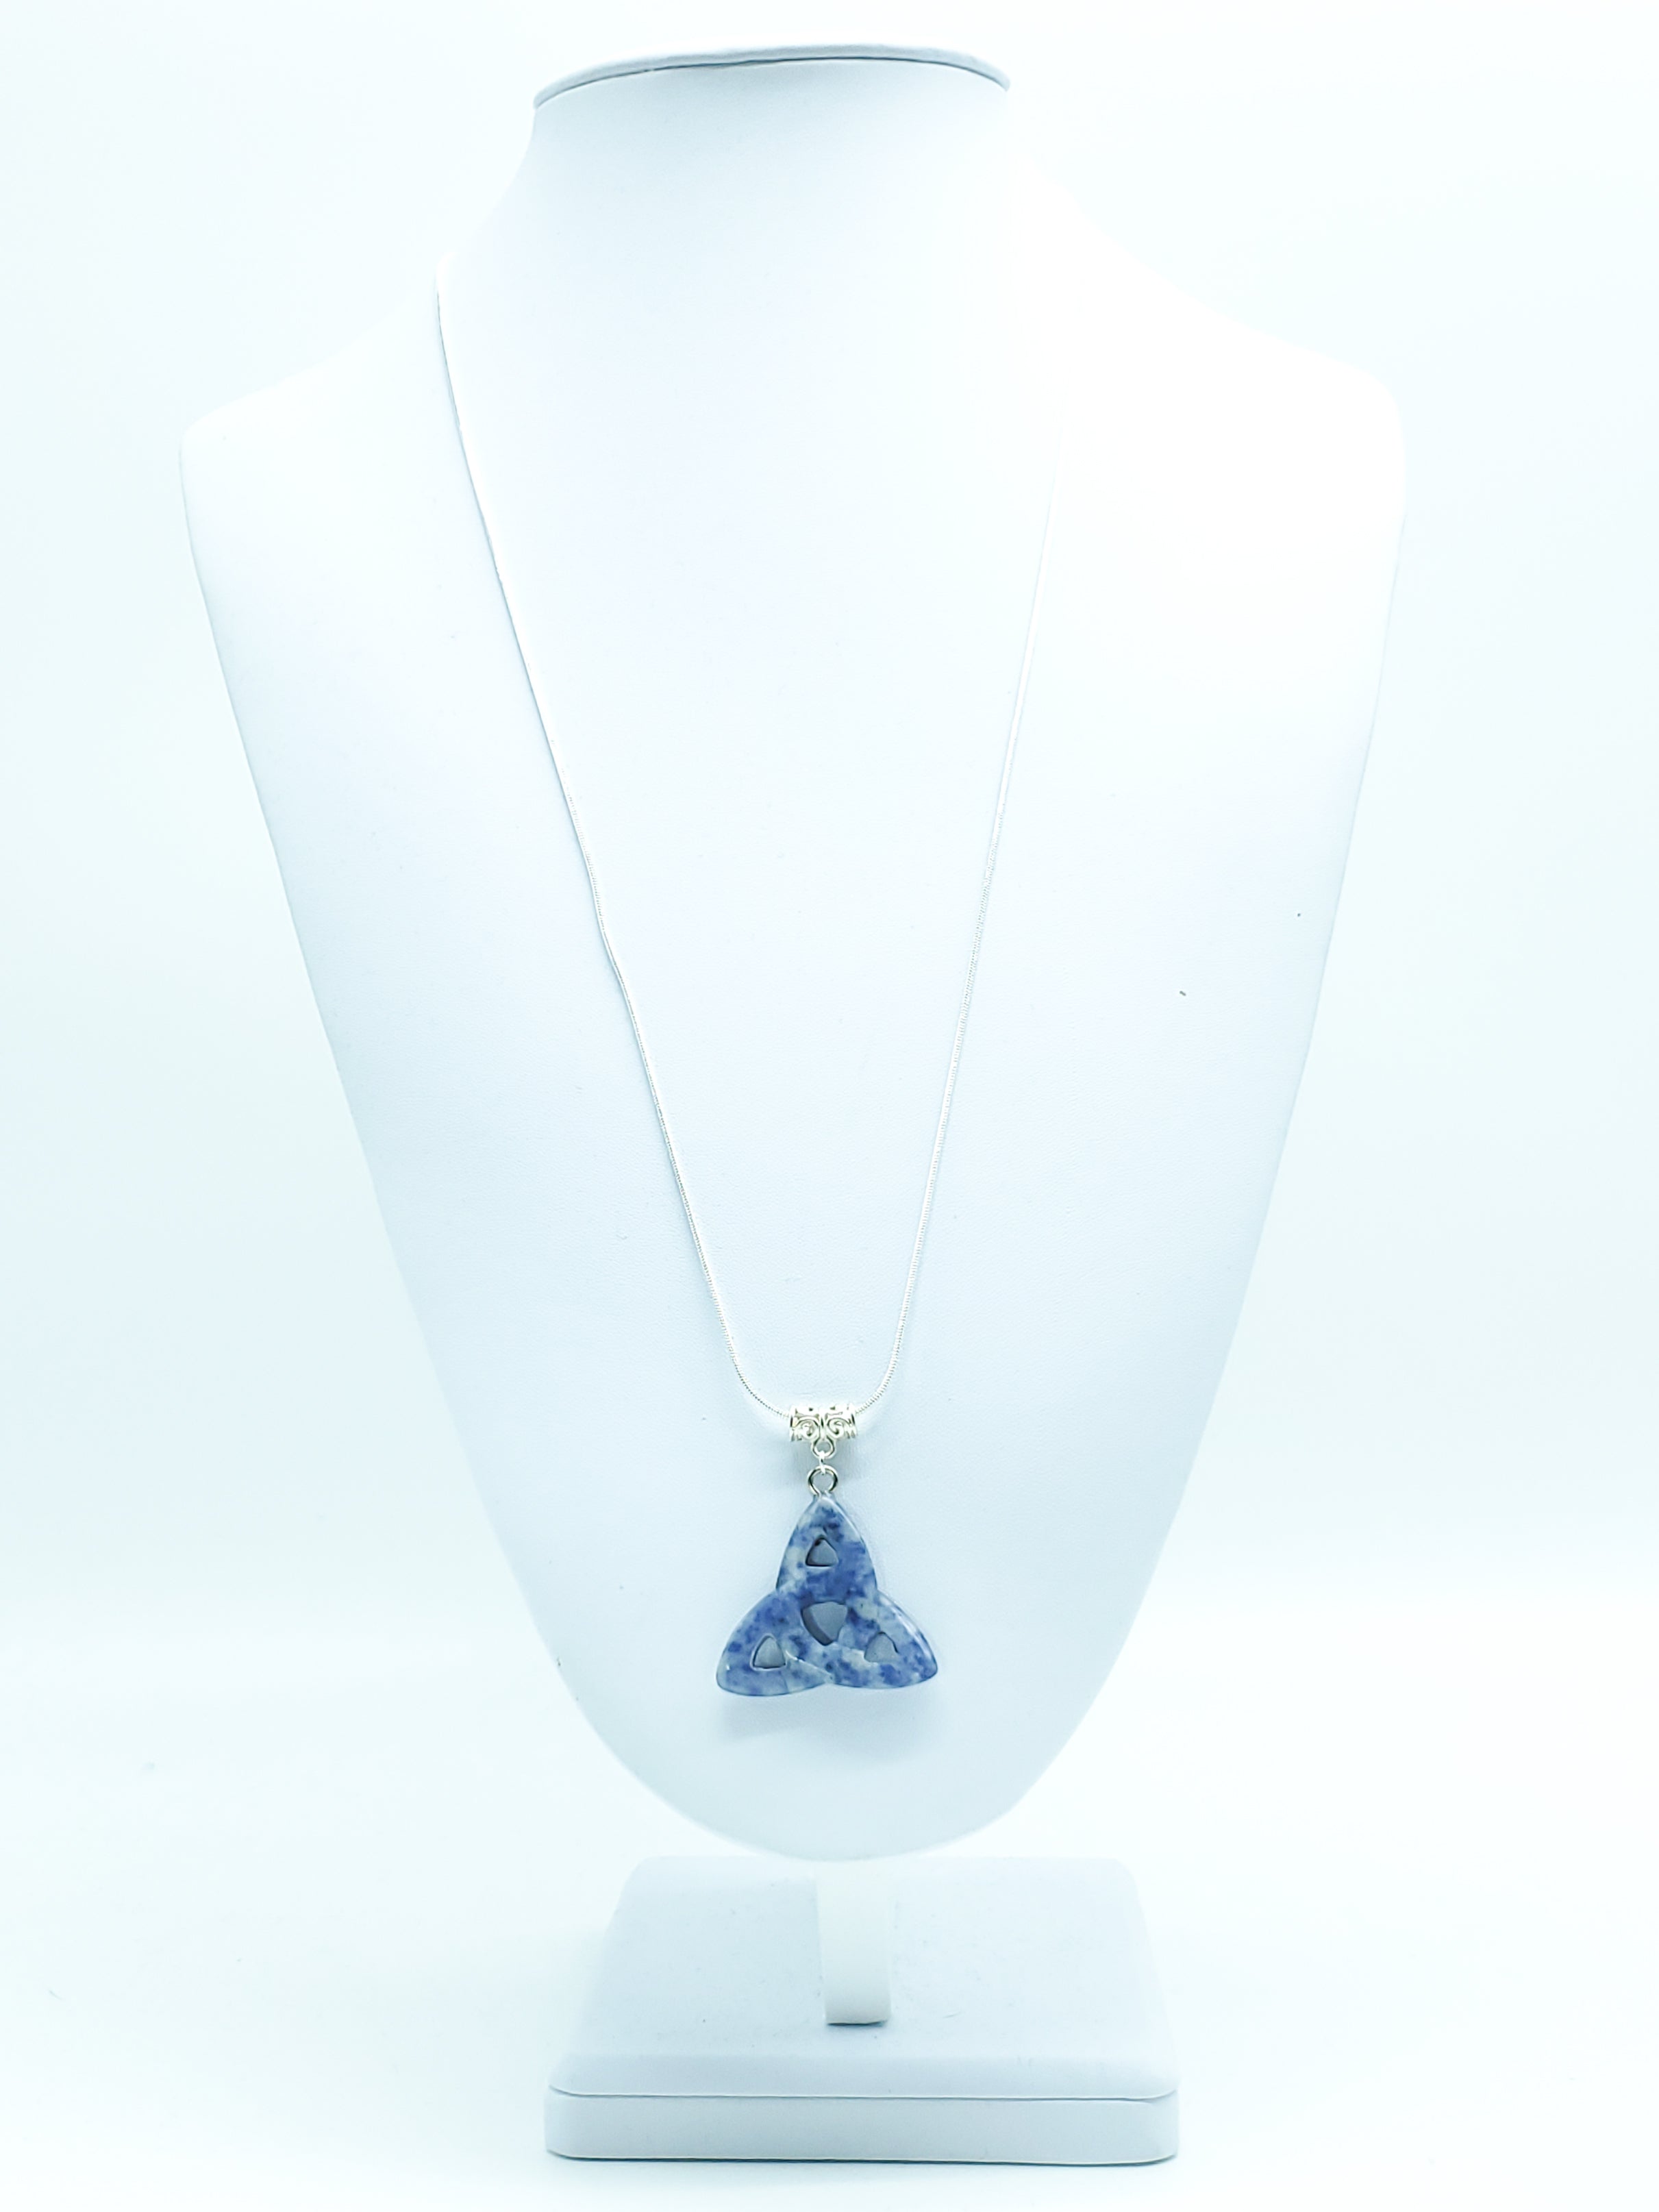 Carved Sodalite Triquera on Sterling Silver Snake Chain - The Caffeinated Raven